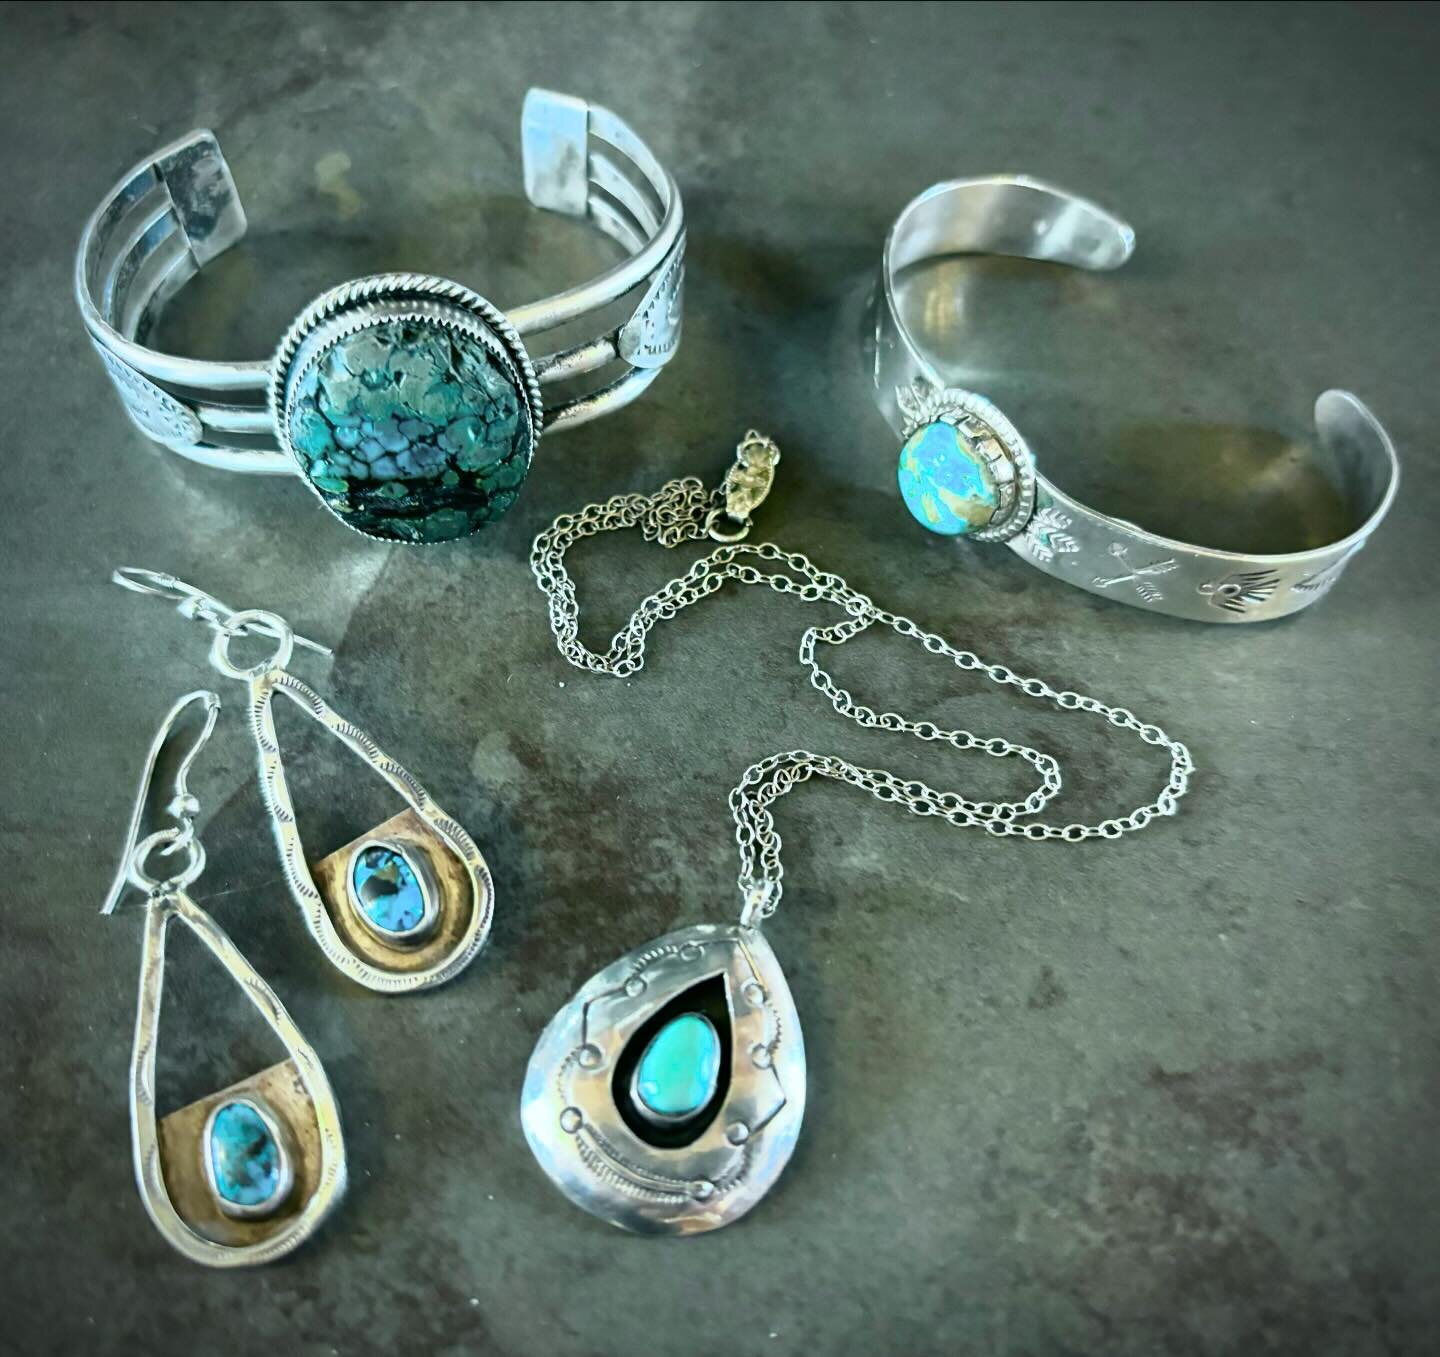 Turquoise set in sterling silver is a combination that captures the essence of natural beauty and classic elegance. The vibrant blue-green hue of the stone paired with the lustrous shine of sterling silver creates a contrast that is both eye-catching